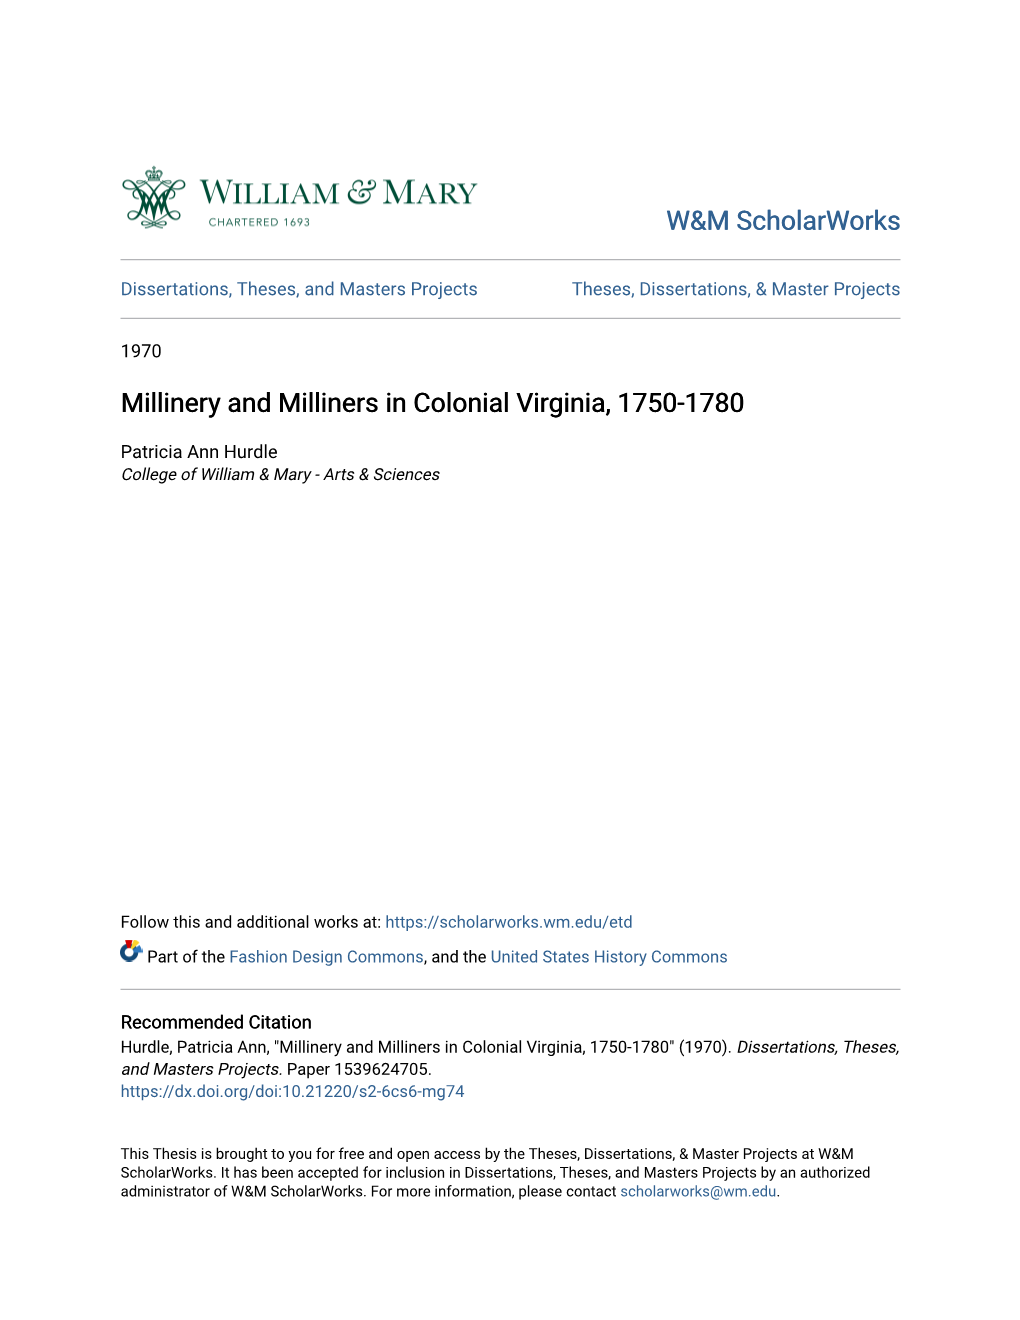 Millinery and Milliners in Colonial Virginia, 1750-1780